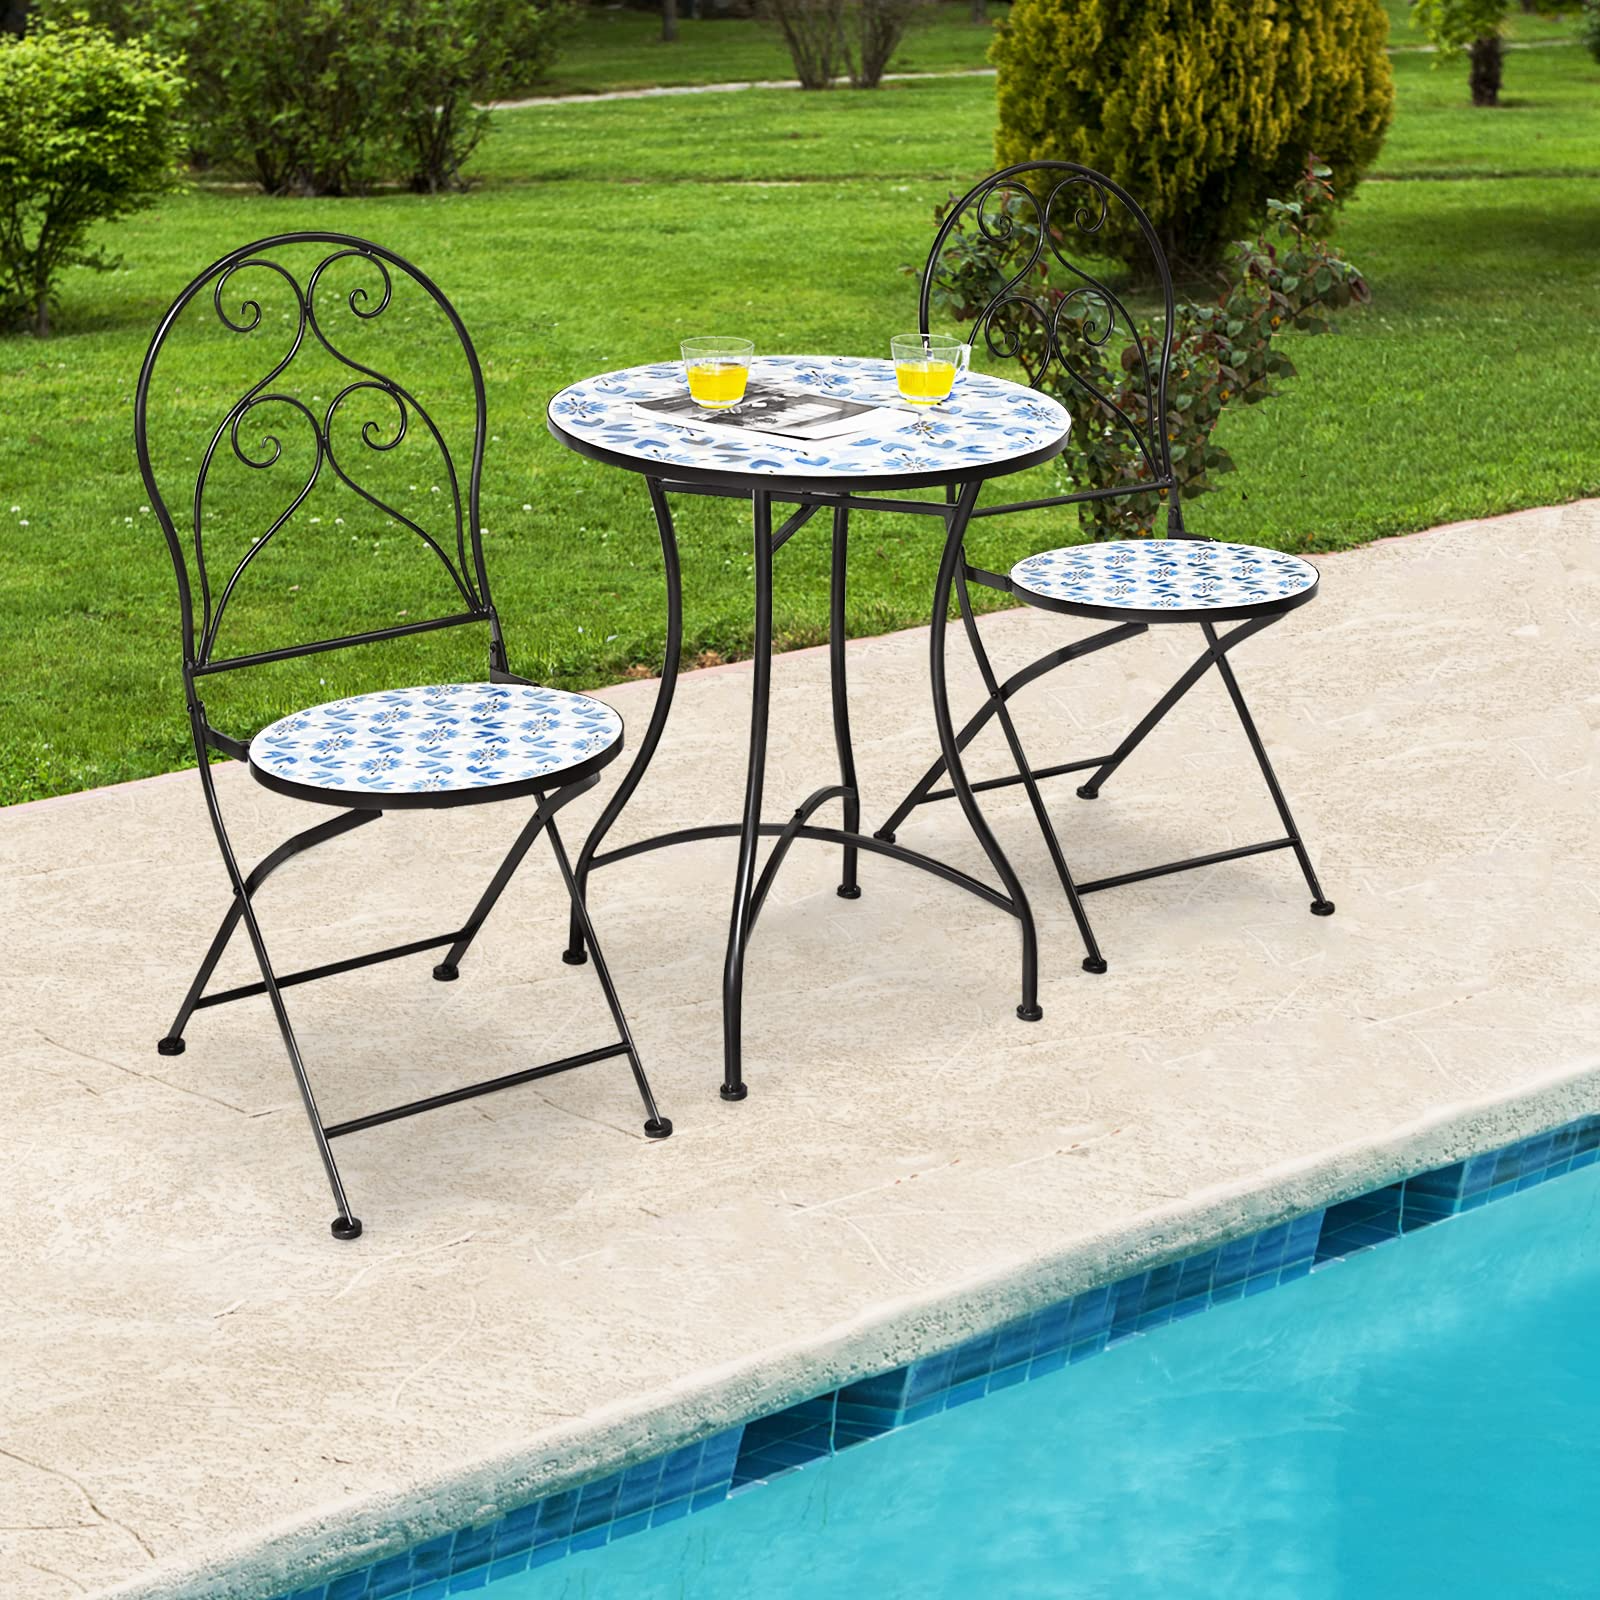 3-Piece Patio Bistro Set, Outdoor Dining Set Round Table and 2 Folding Chairs